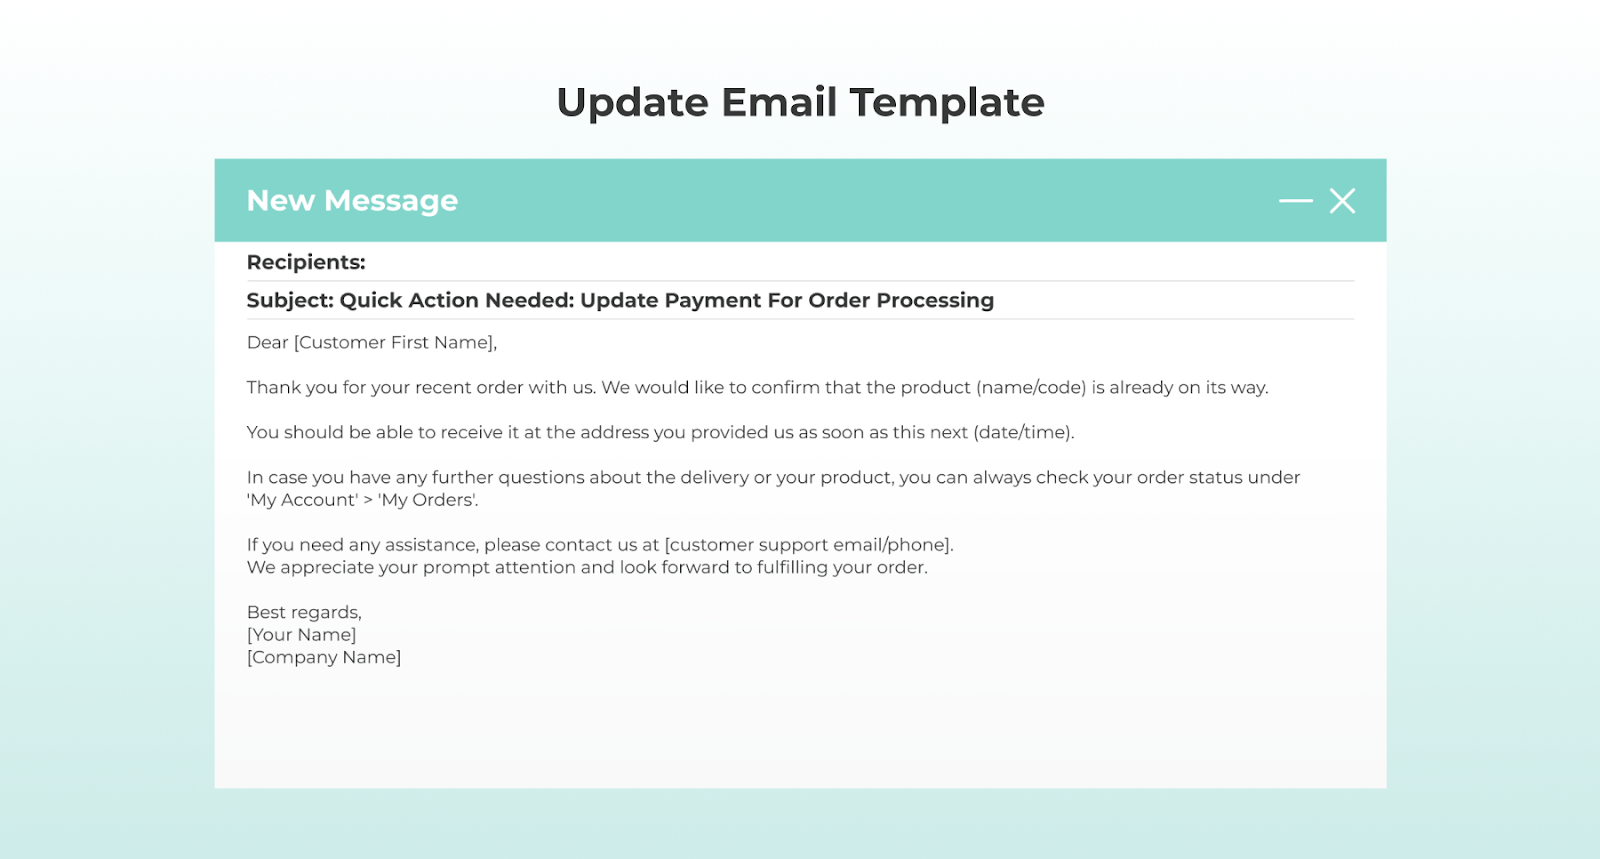 Update Email Template